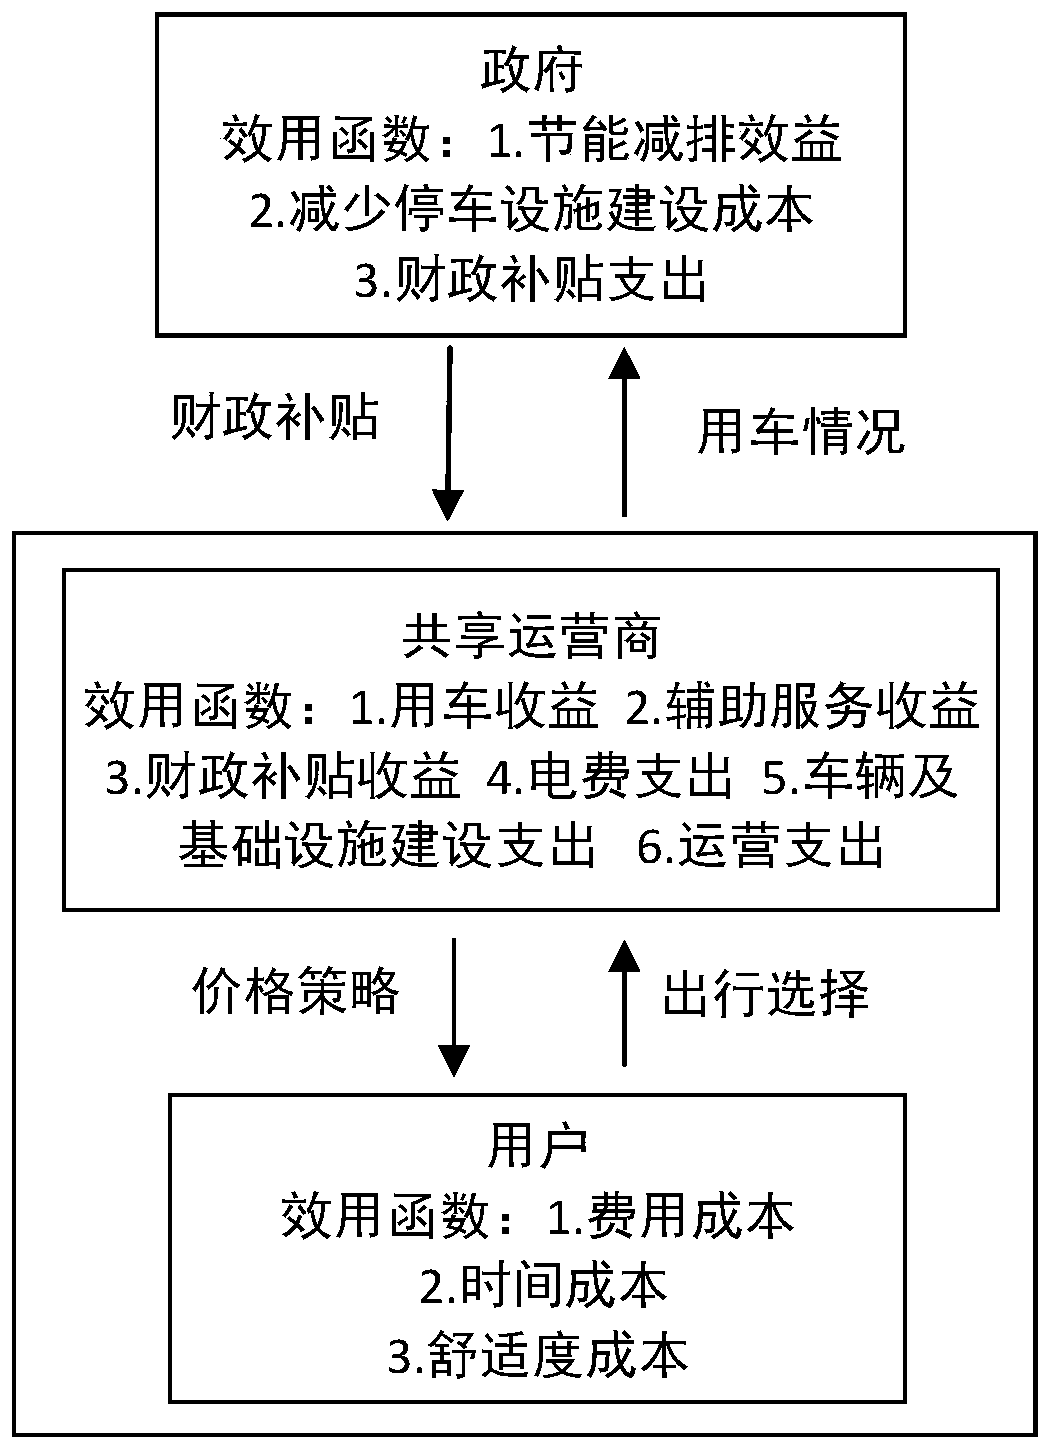 Shared electric vehicle subsidy and pricing method of two-stage master-slave game